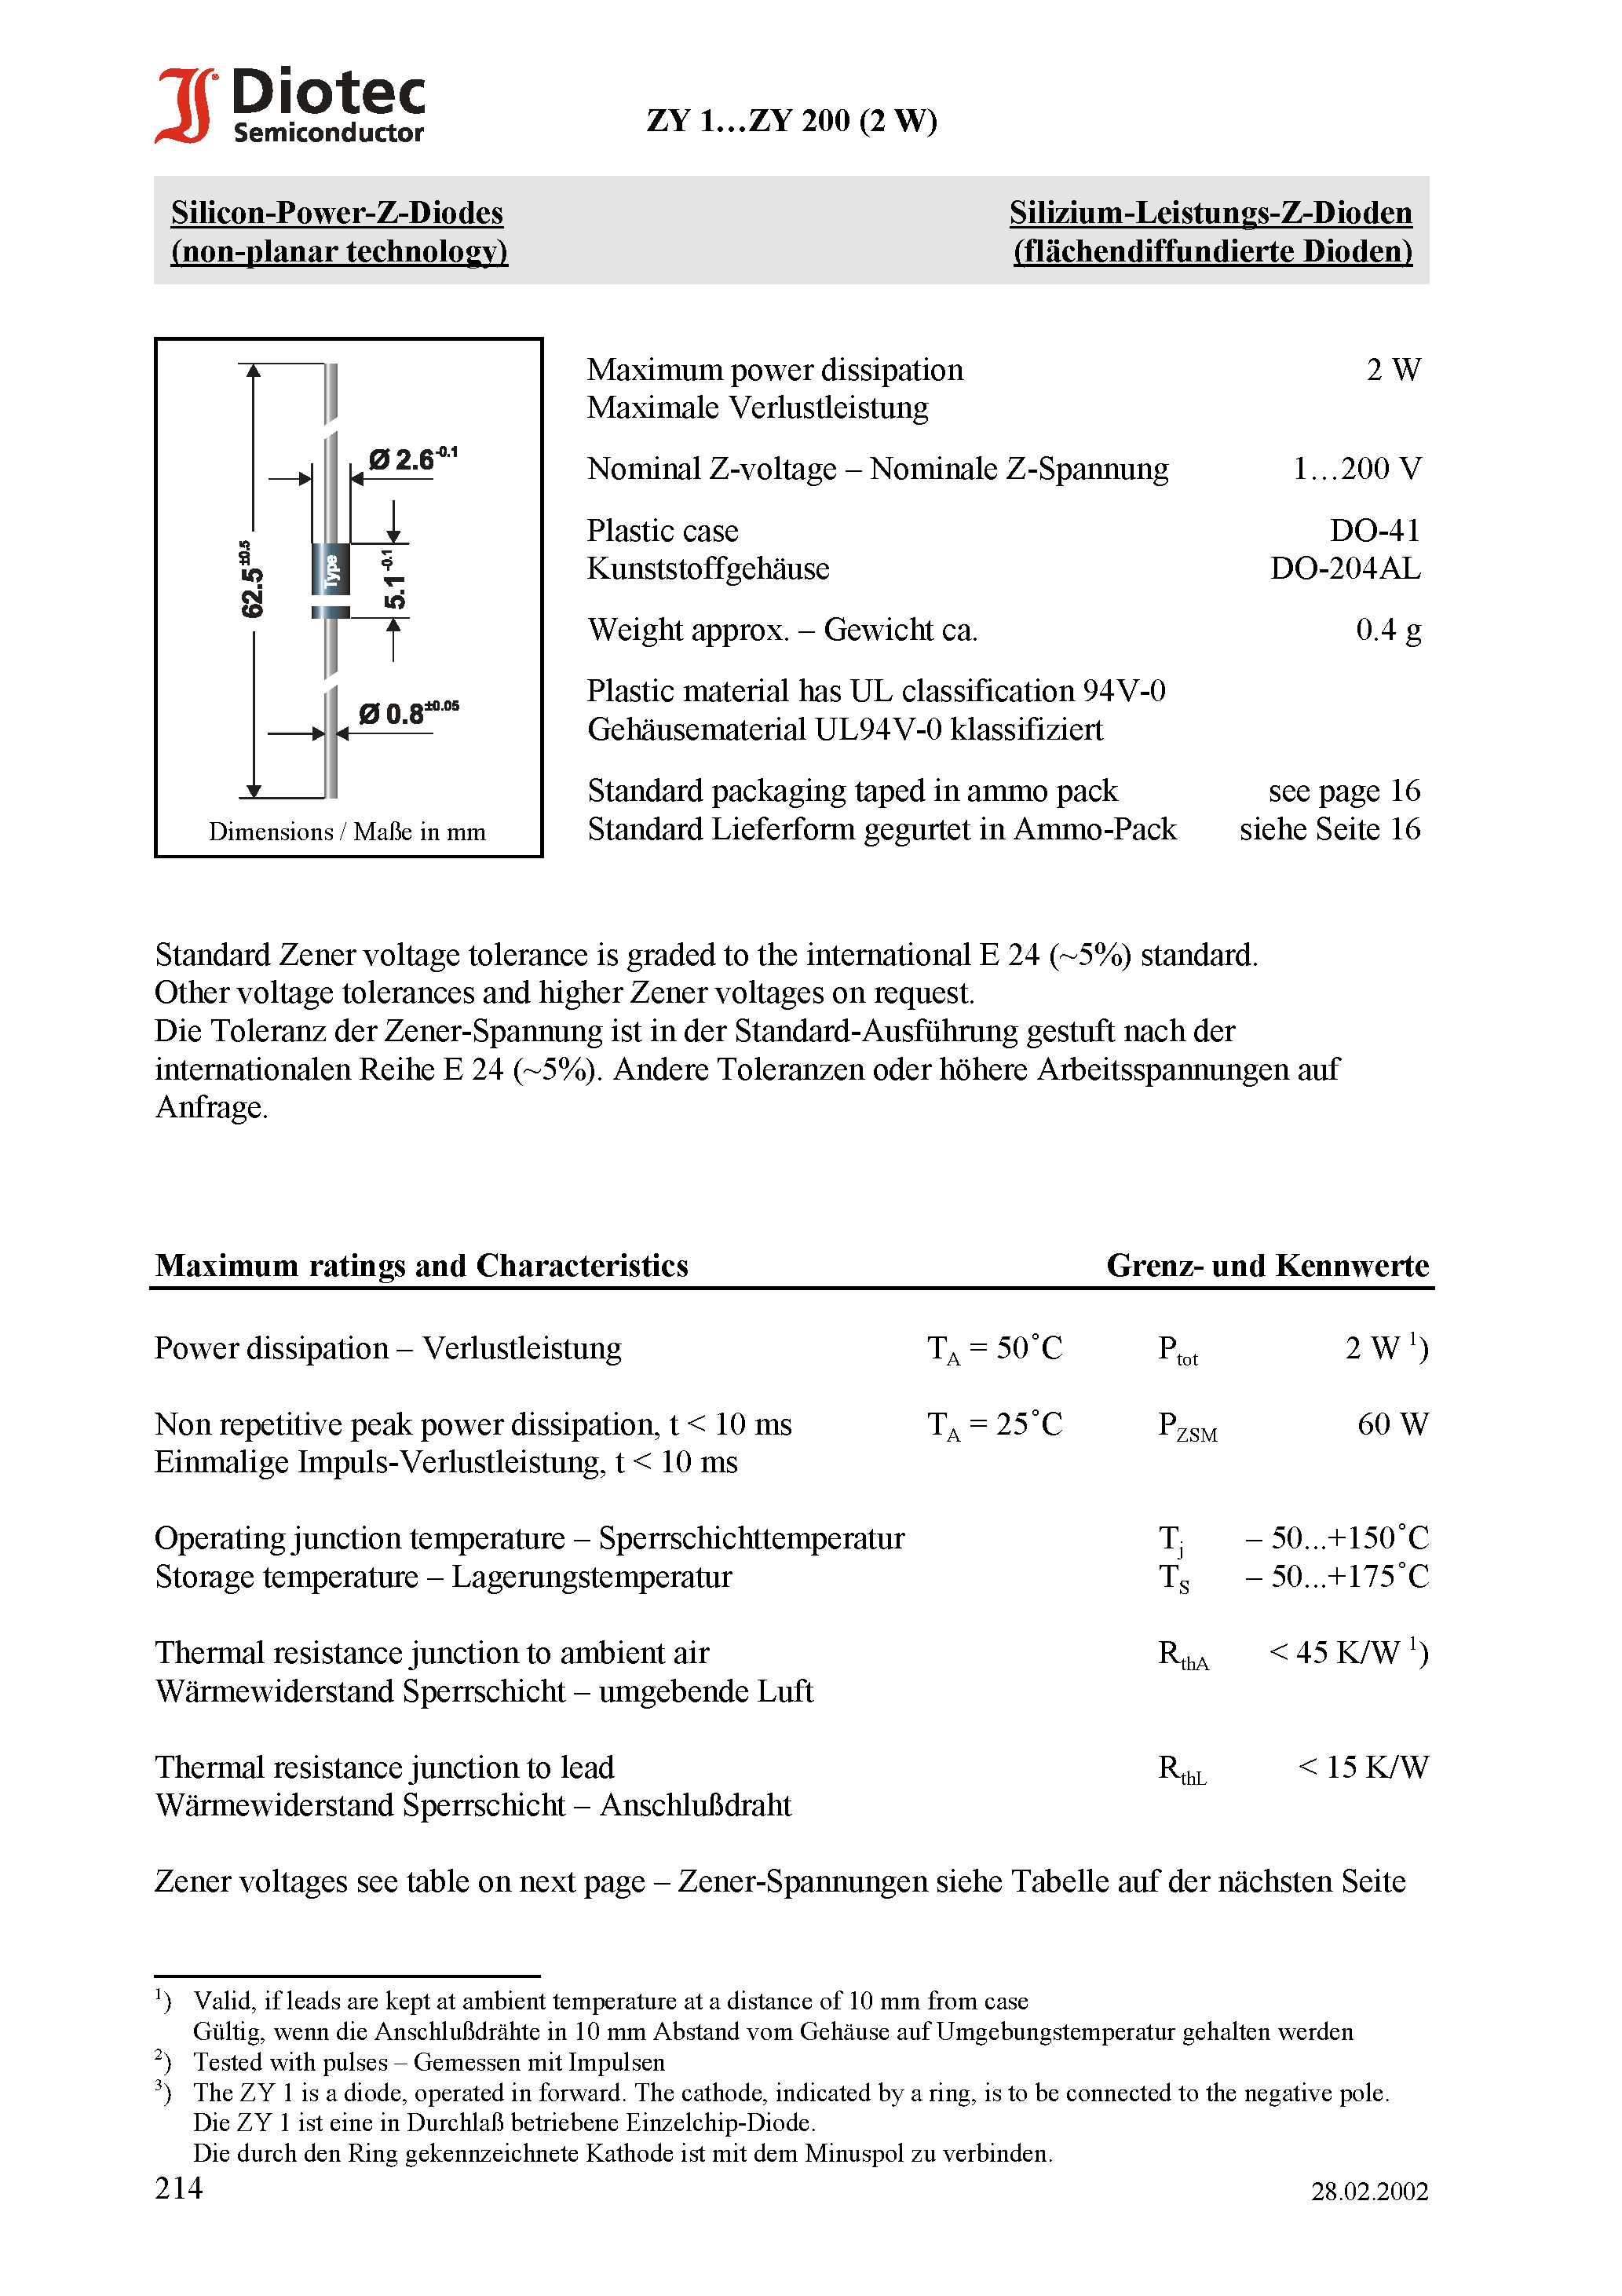 Datasheet ZY43 - Silicon-Power-Z-Diodes (non-planar technology) page 1